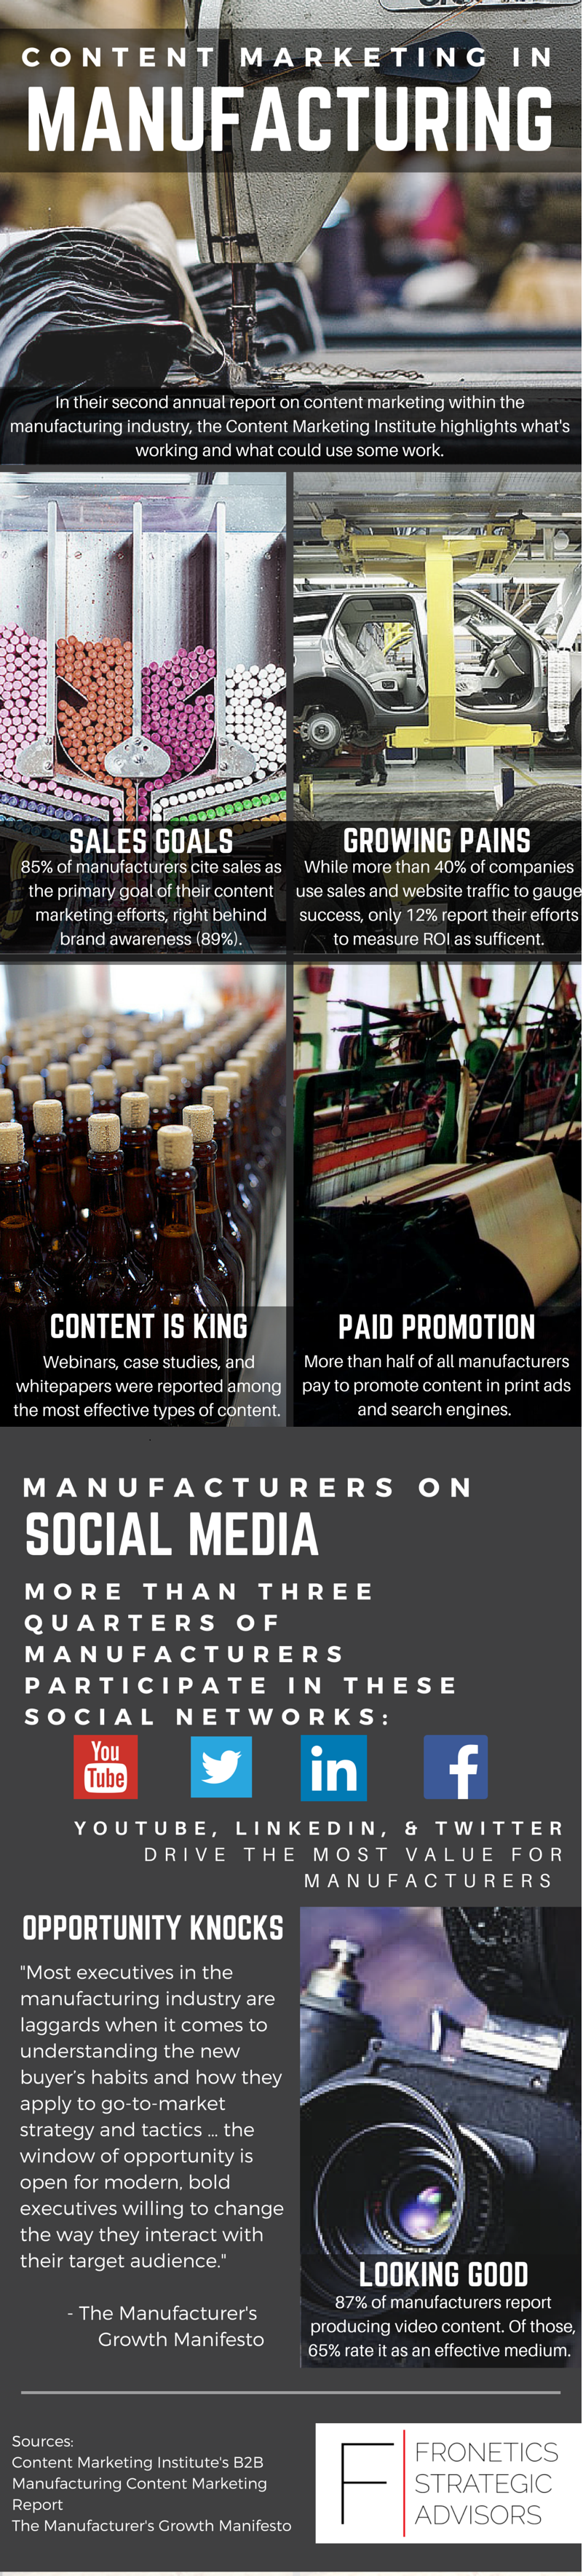 Infographic content marketing in manufacturing